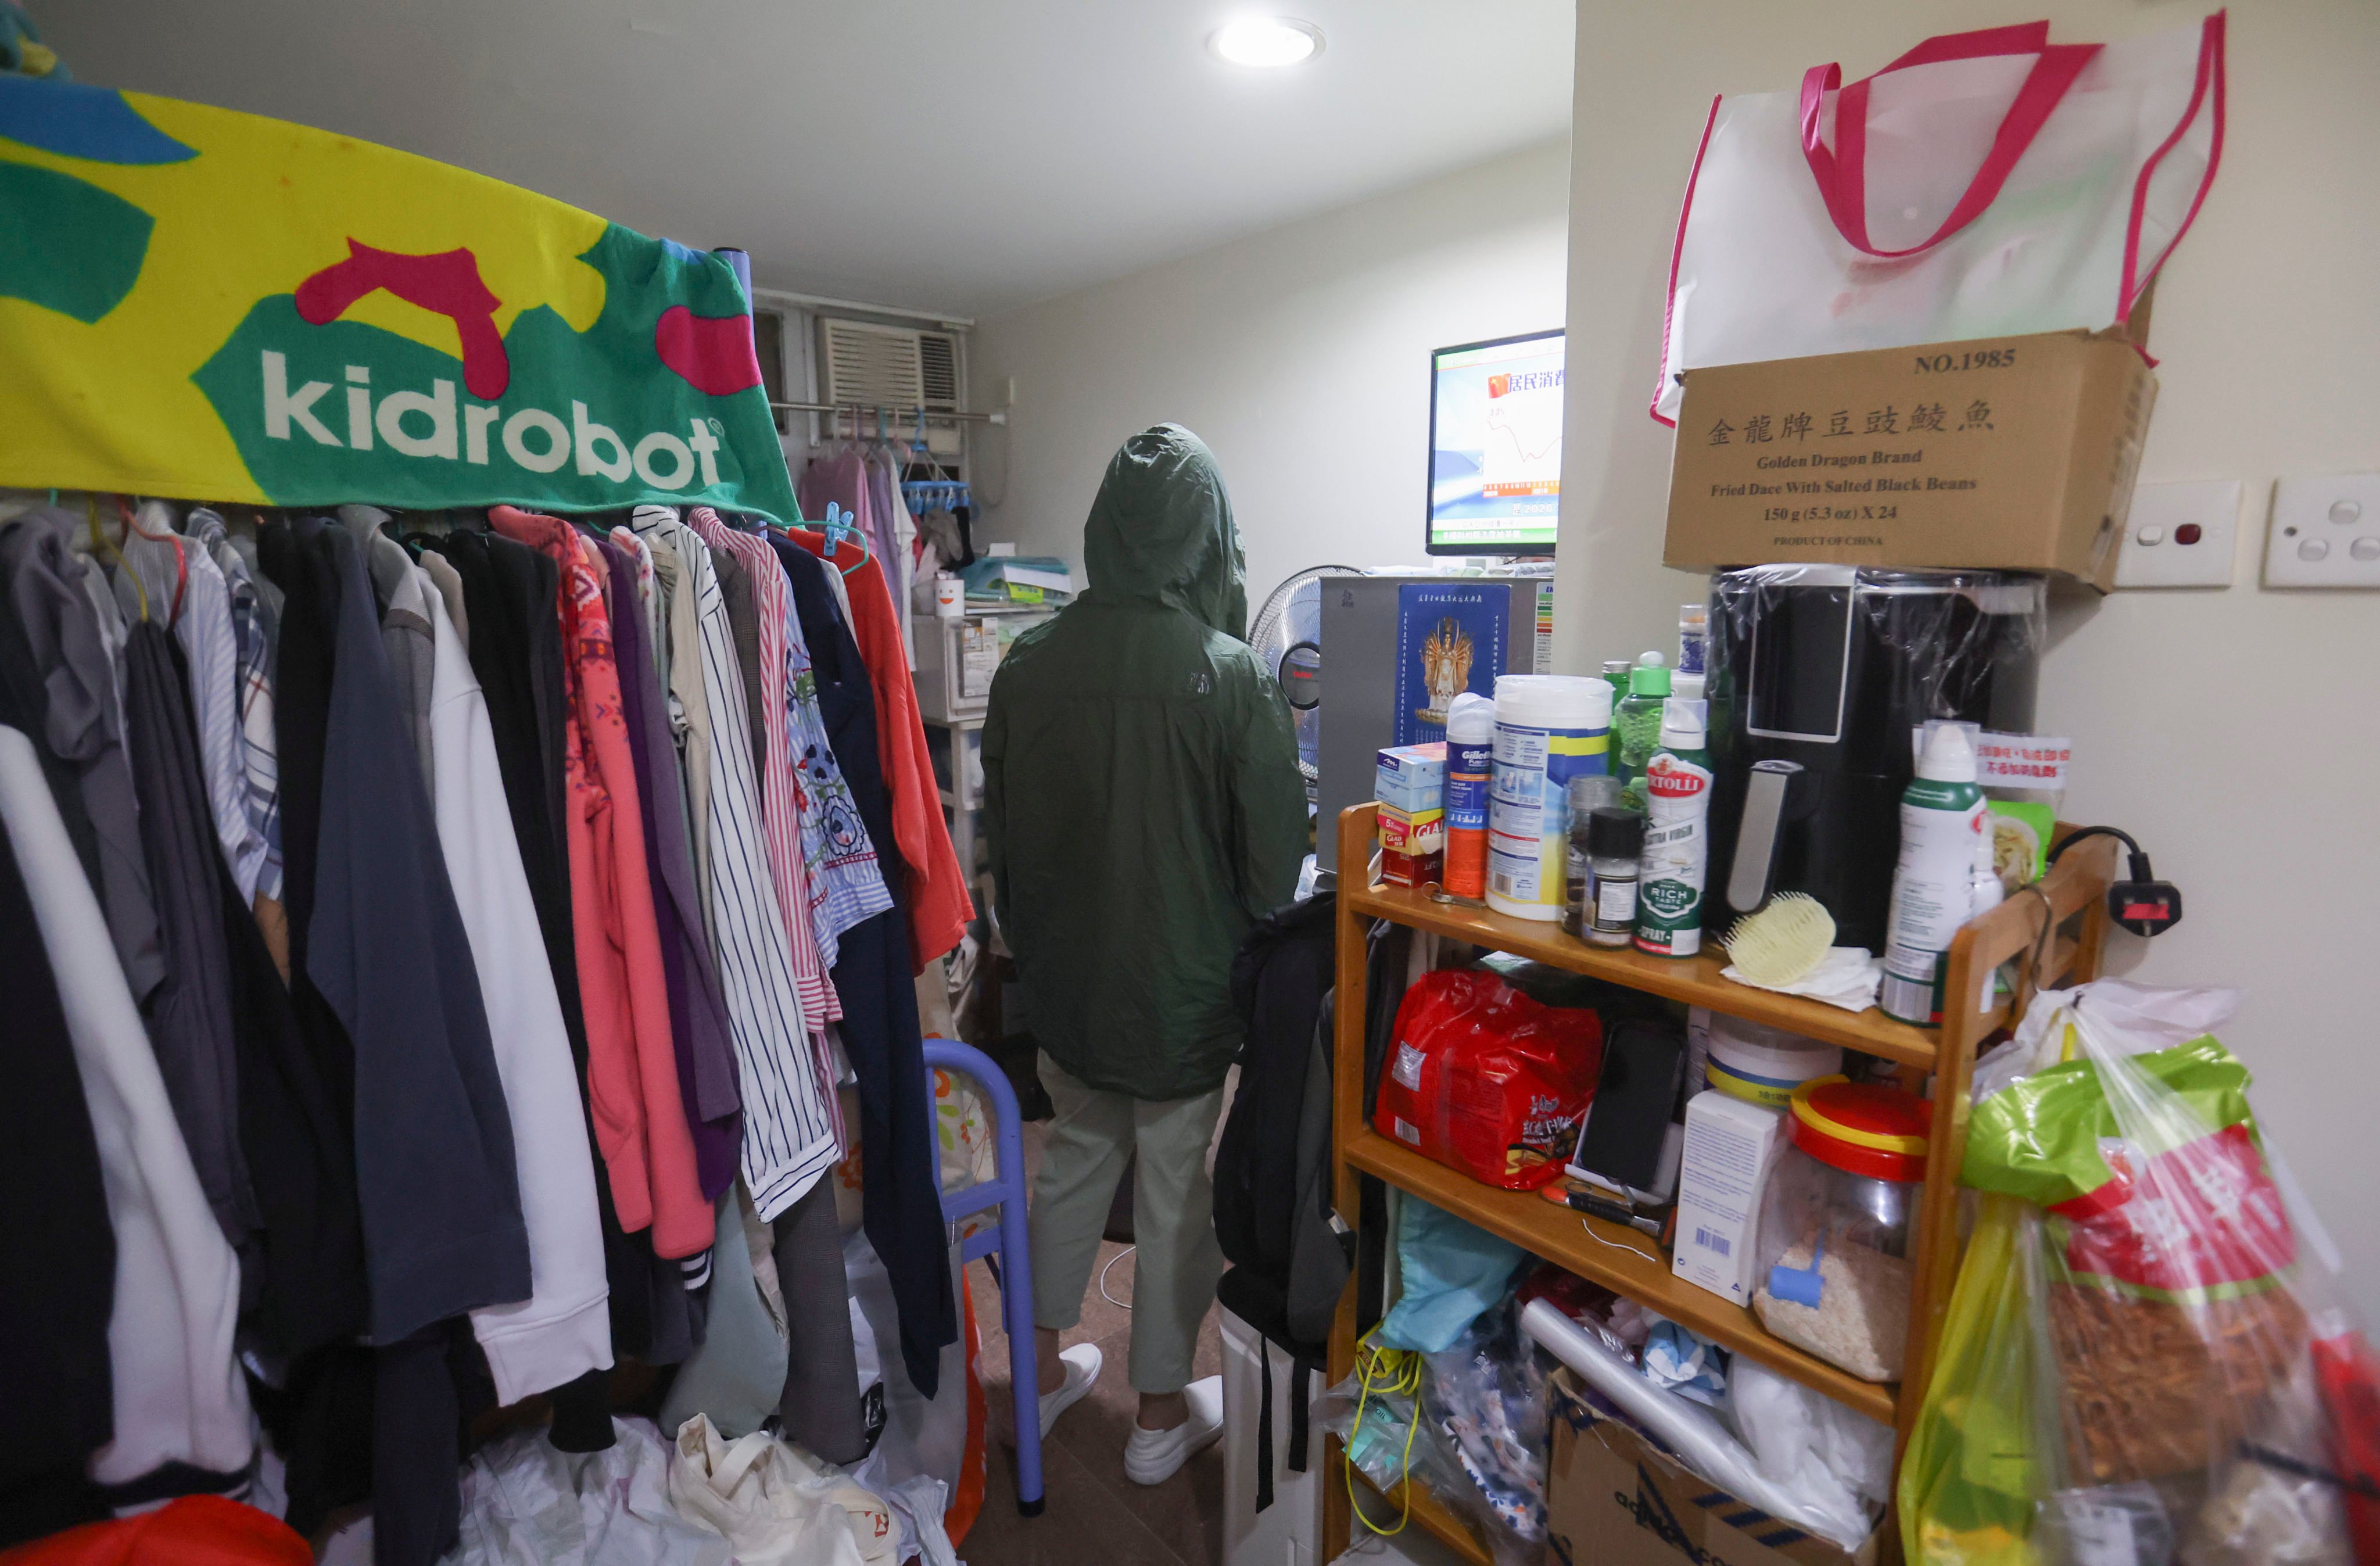 May in the tiny flat in Sai Ying Pun she was forced to move to after her time in a transitional home ran out before public housing became available. Photo: Edmond So